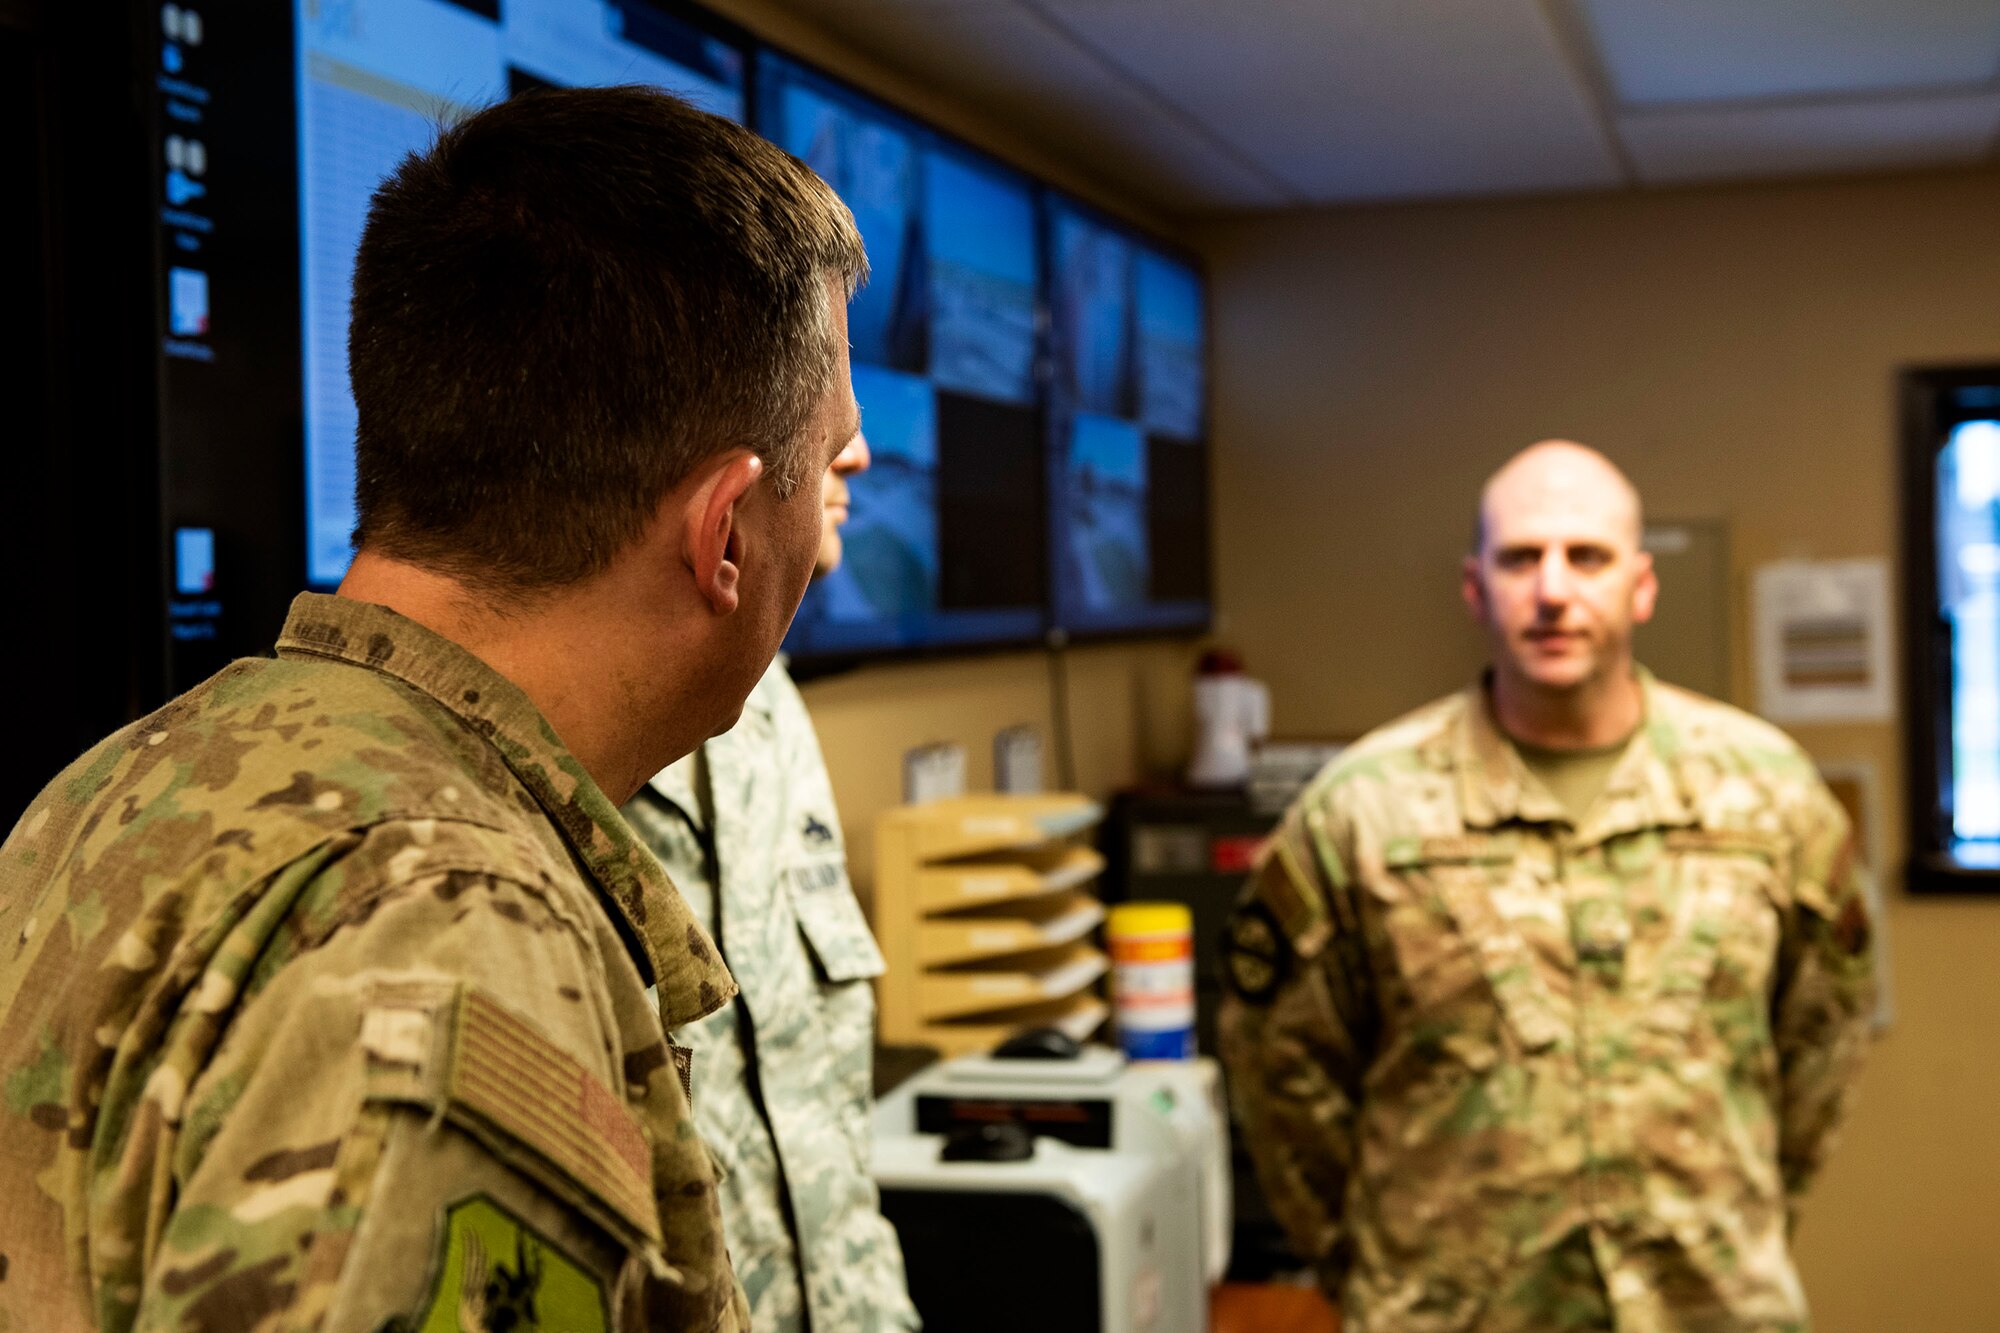 Col. Dan Walls, left, 23d Wing commander, talks with Master Sgt. Shawn Osner, 23d Maintenance Squadron (MXS) NCO in charge of munitions control, during an immersion tour Oct. 28, 2019, at Moody Air Force Base, Ga. Walls toured the 23d MXS munitions flight facilities, where the Airmen showcased their squadron and mission. This gave Walls the opportunity to see how 23d MXS improves deployability and ensures mission readiness. (U.S. Air Force photo by Senior Airman Erick Requadt)